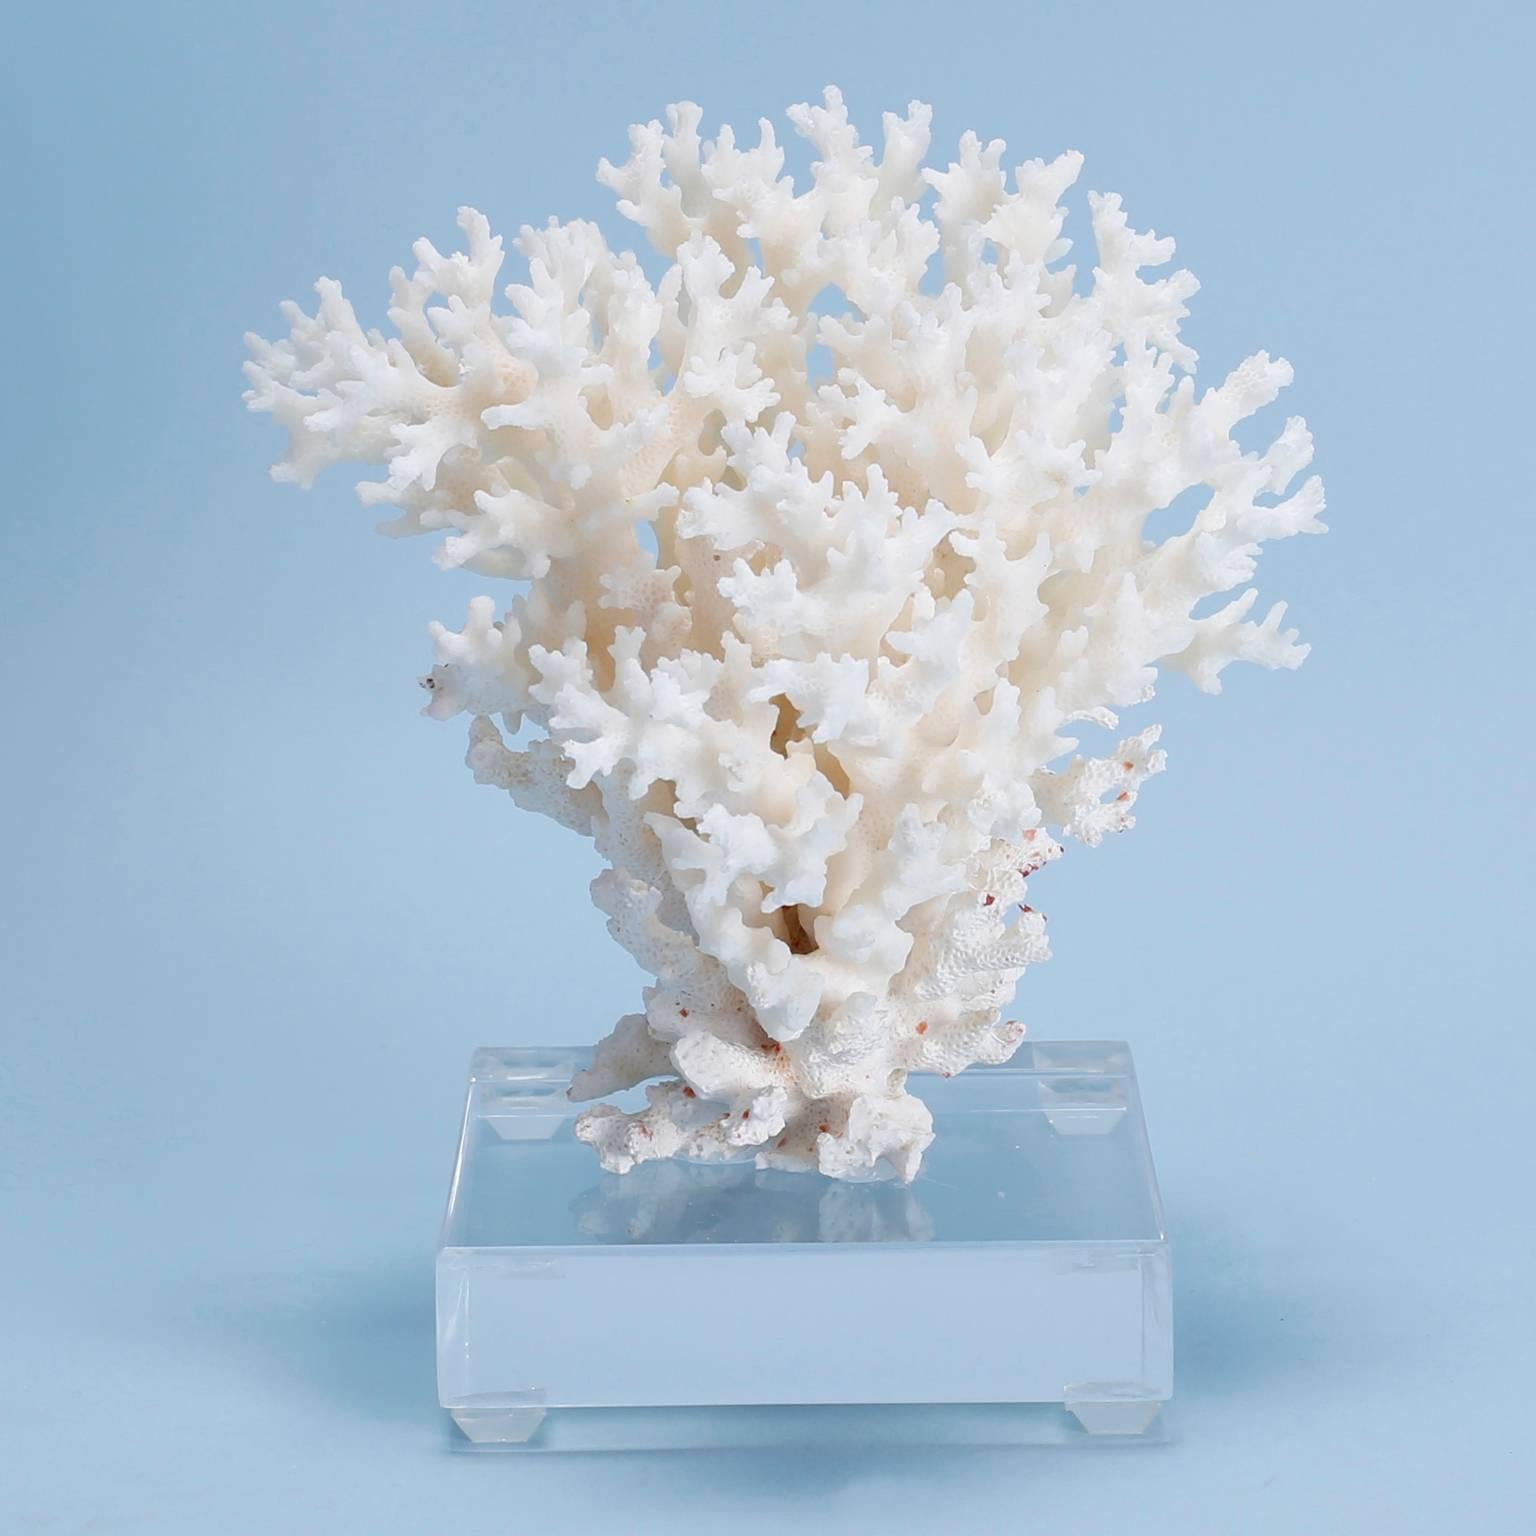 Lace coral specimen with its lofty graceful form and ocean inspired textures. Presented on a custom Lucite base.

Coral cannot be exported out of the USA without Cities permits. These permits are expensive and time consuming, expect an up charge